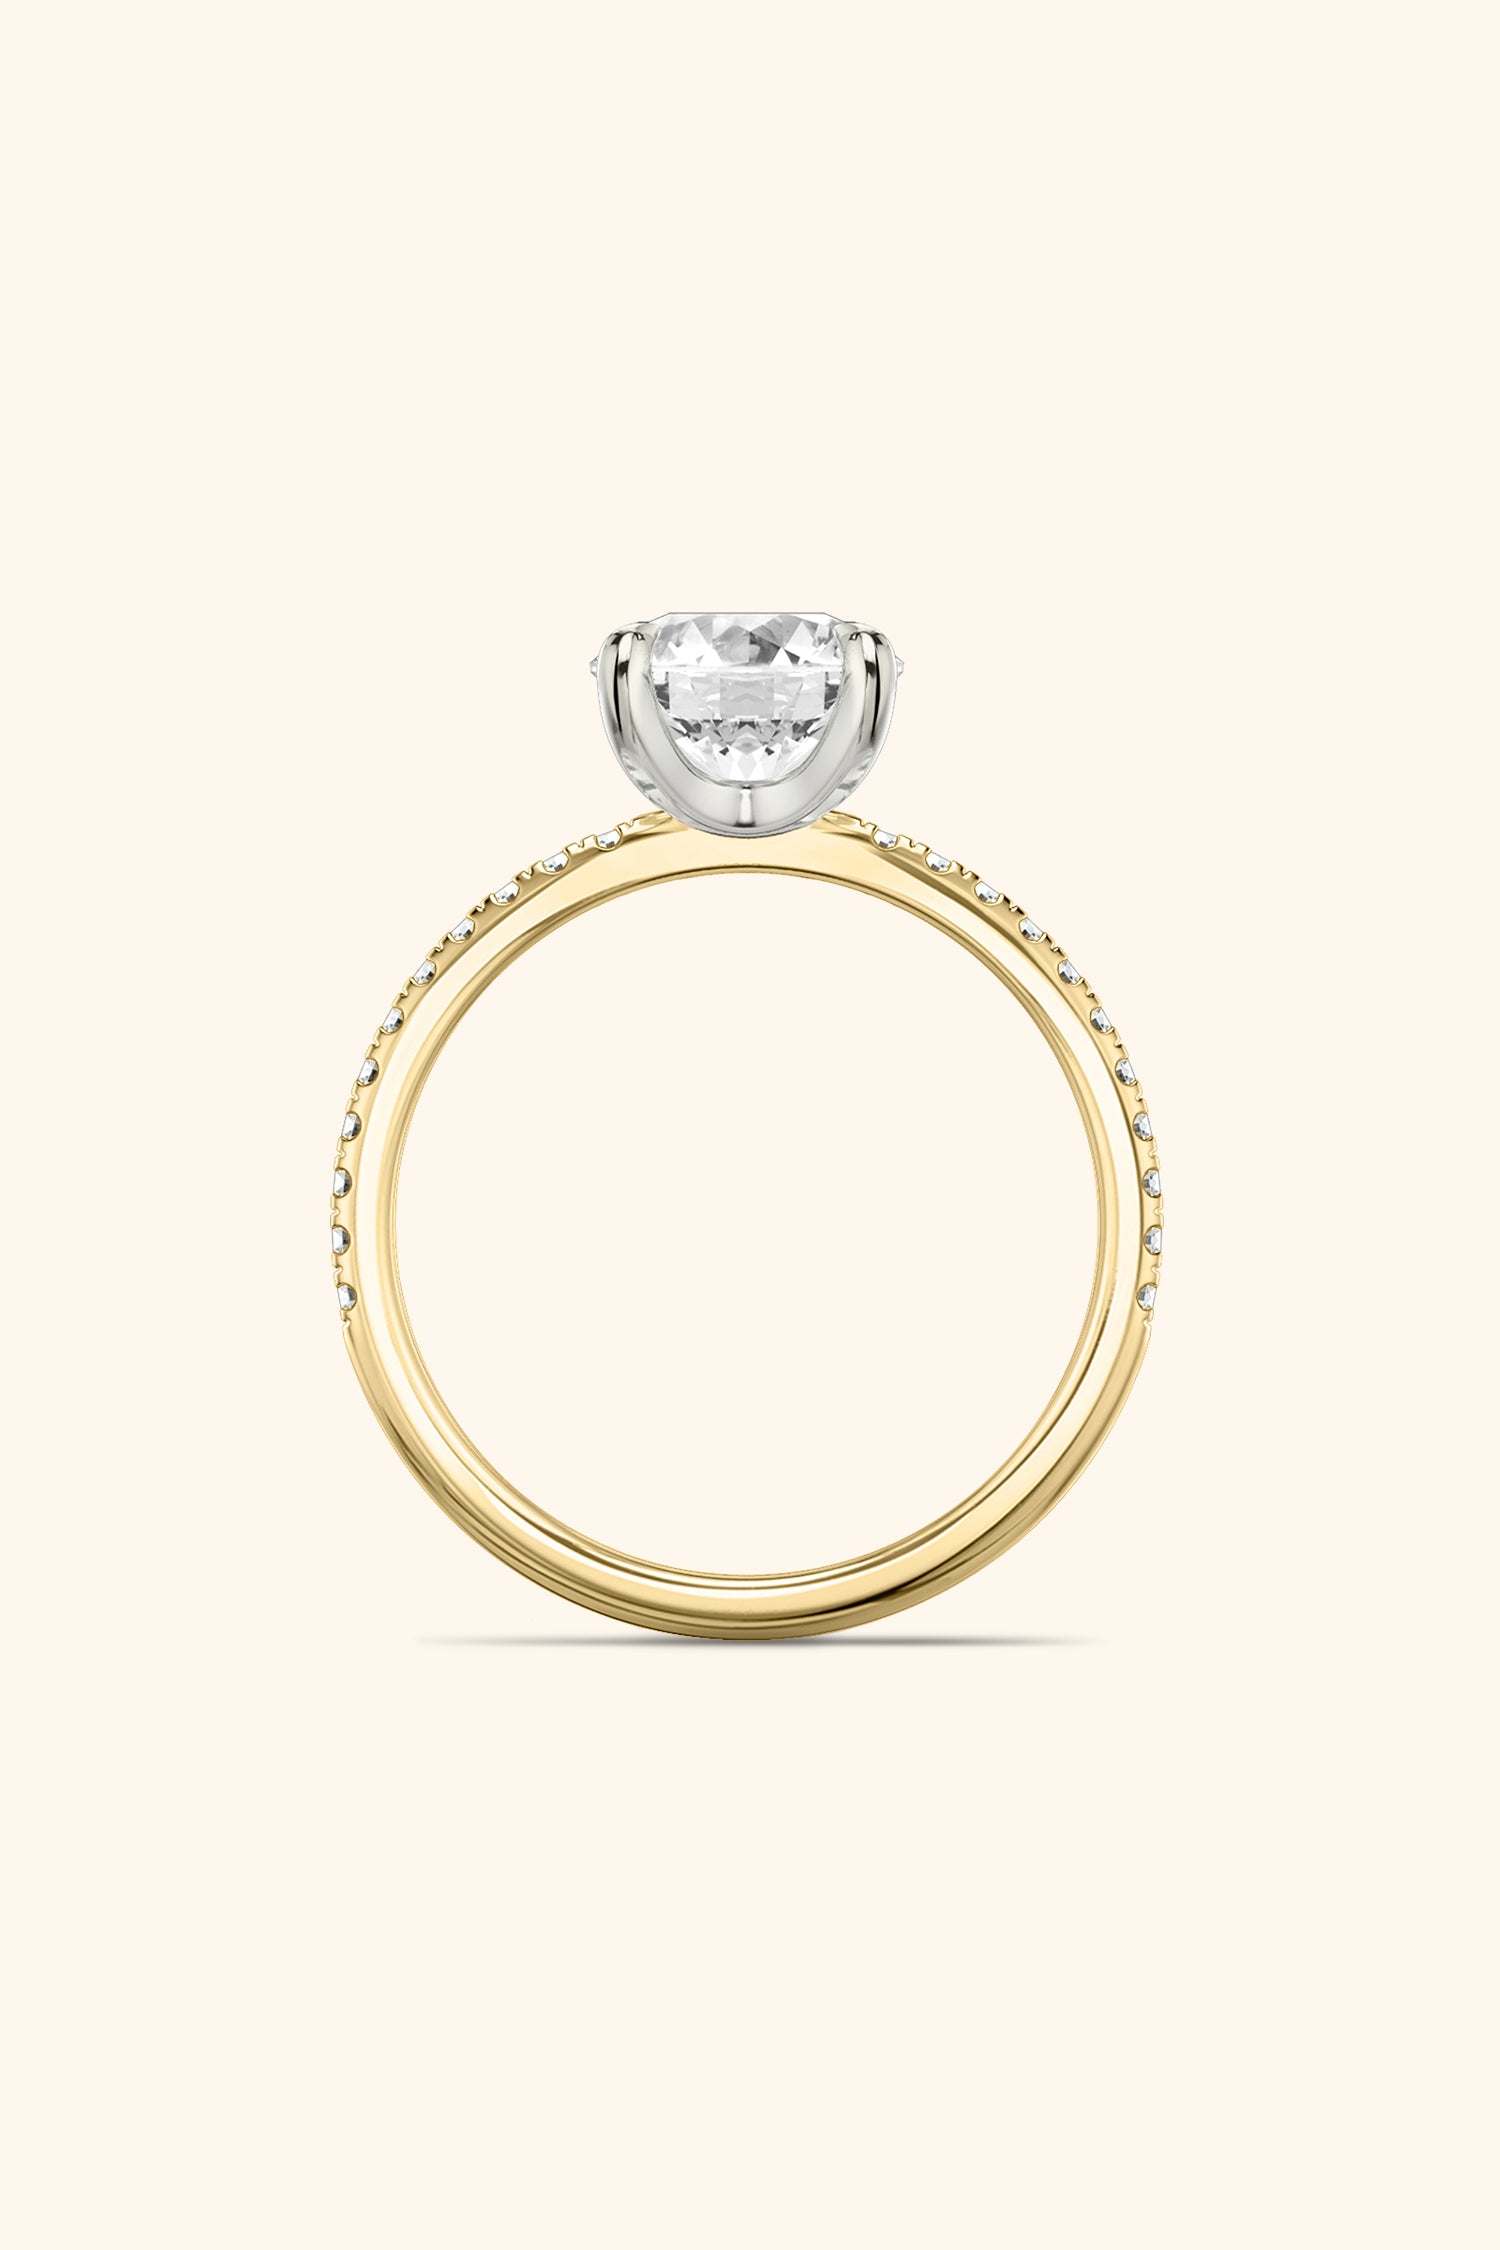 Dual Tone Glance Pave Ring with 2 Carat Round Brilliant Solitaire